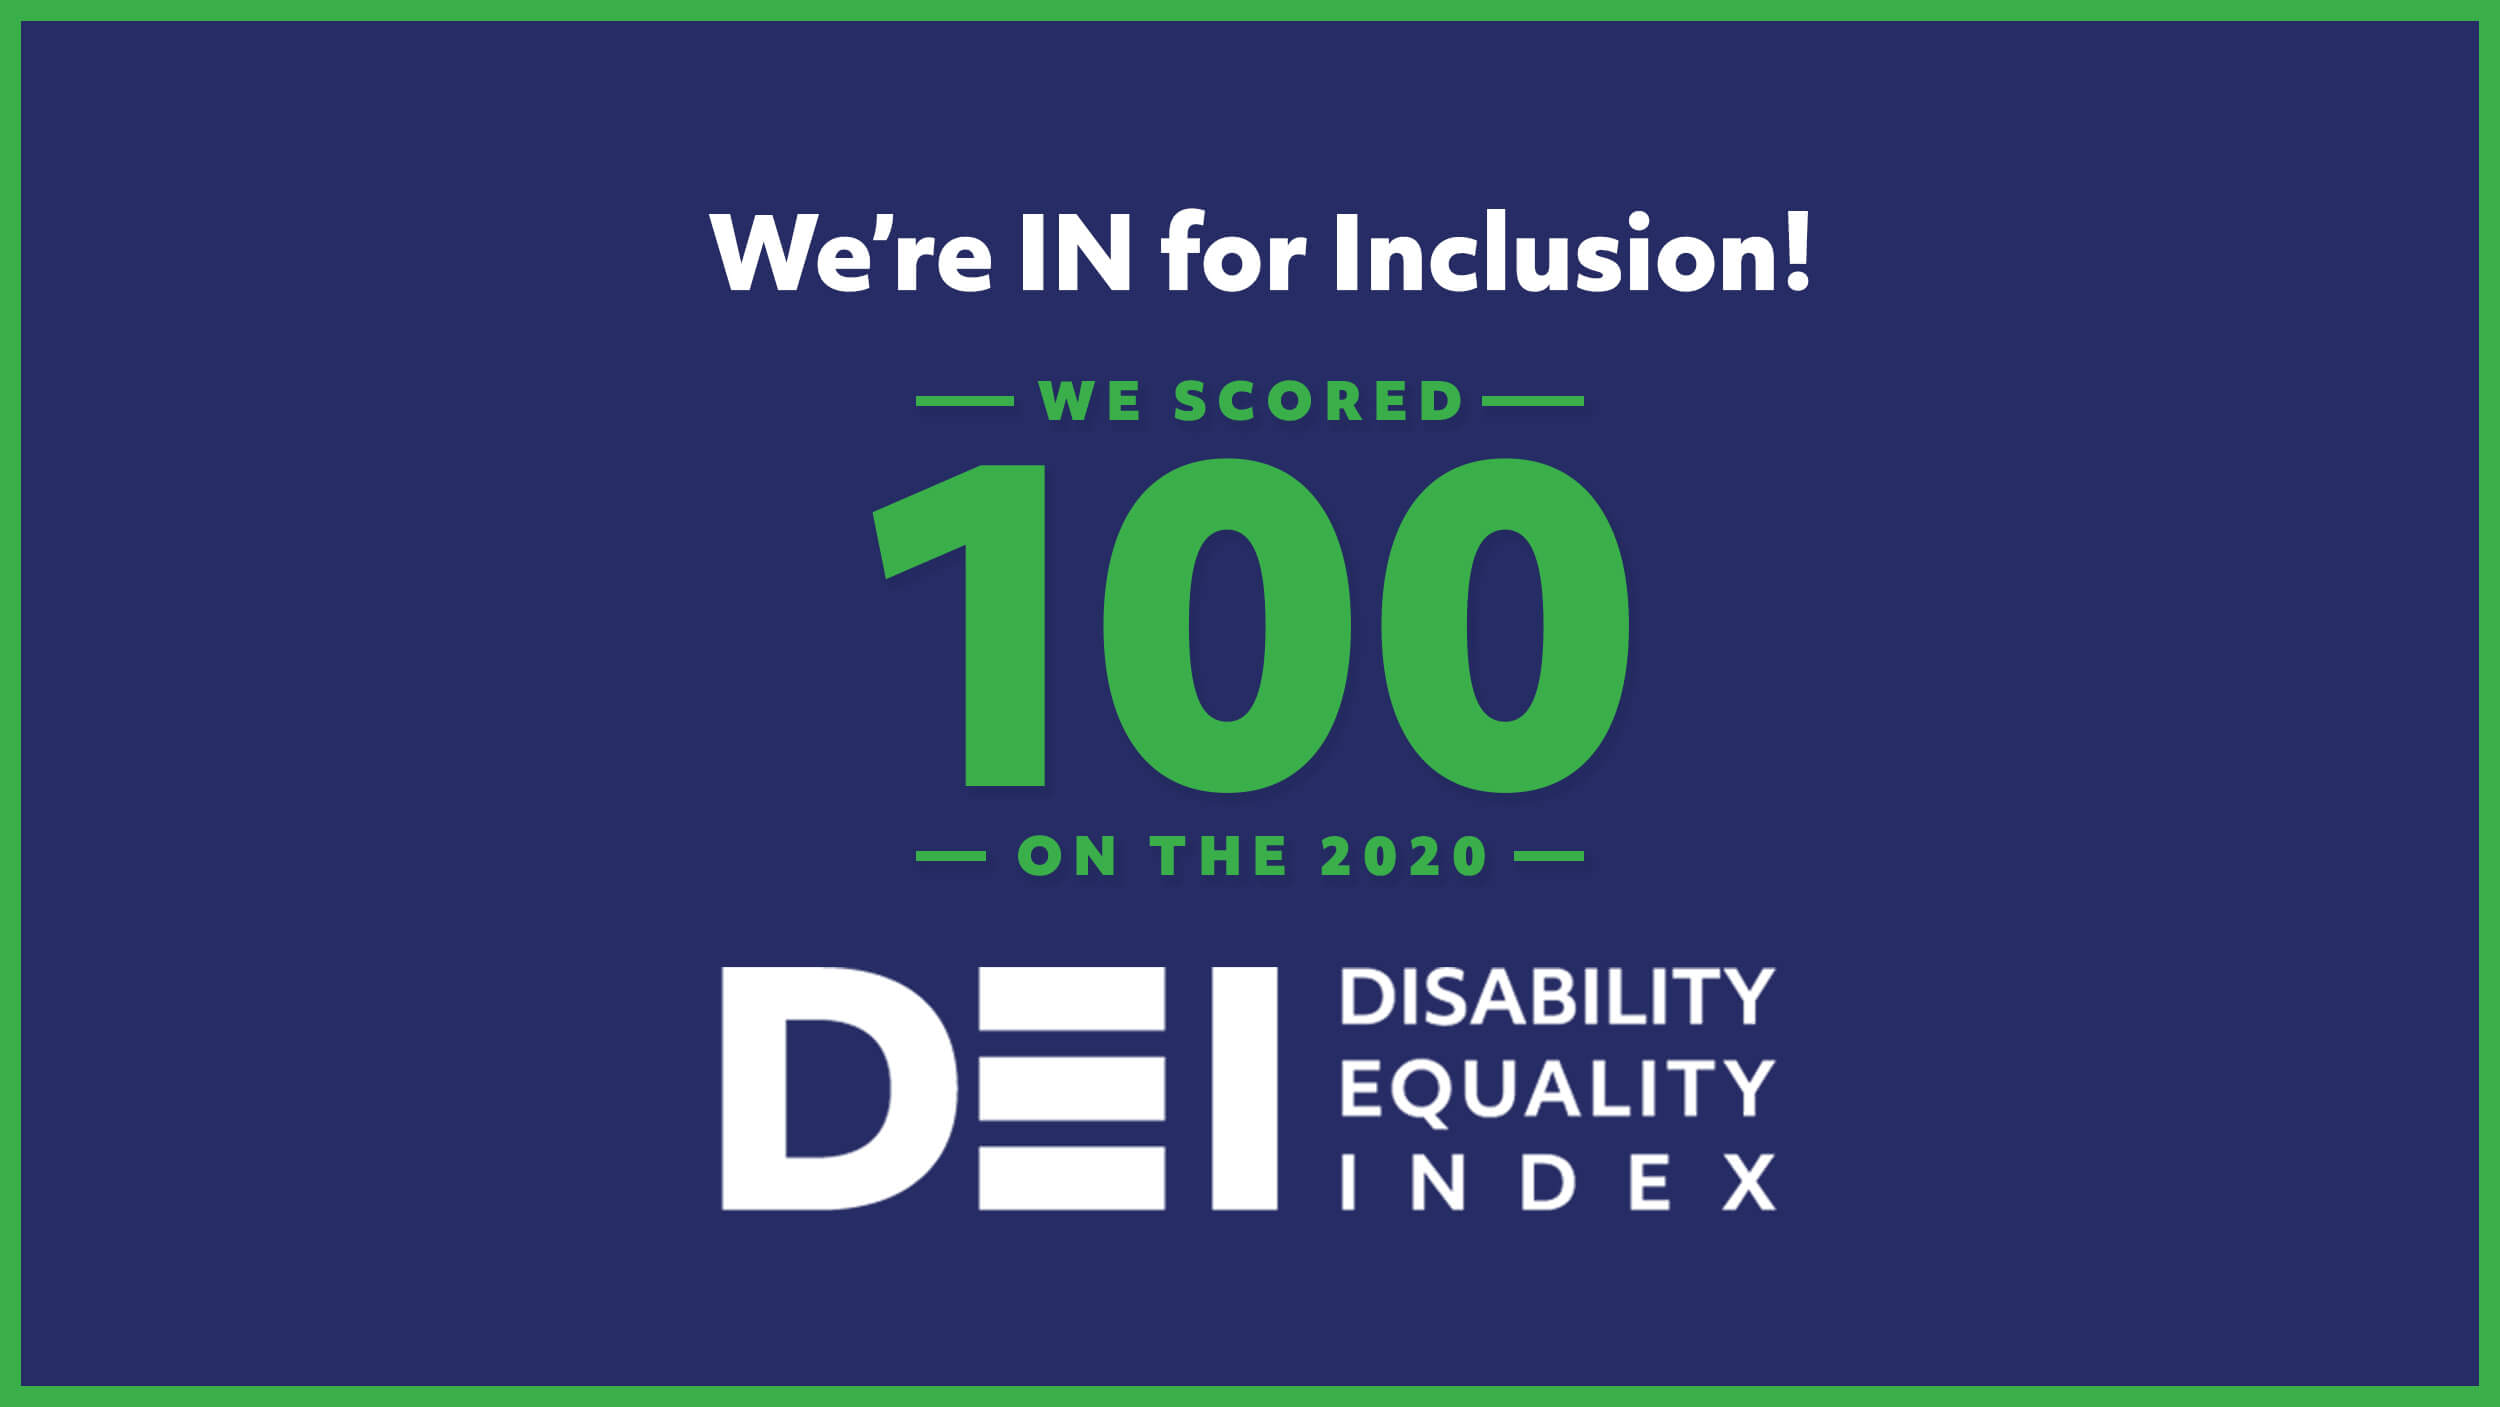 A graphic containing stylized text reading: We&#039;re IN for inclusion! We scored &quot;100&quot; on the 2020 Disability Equality Index (DEI).